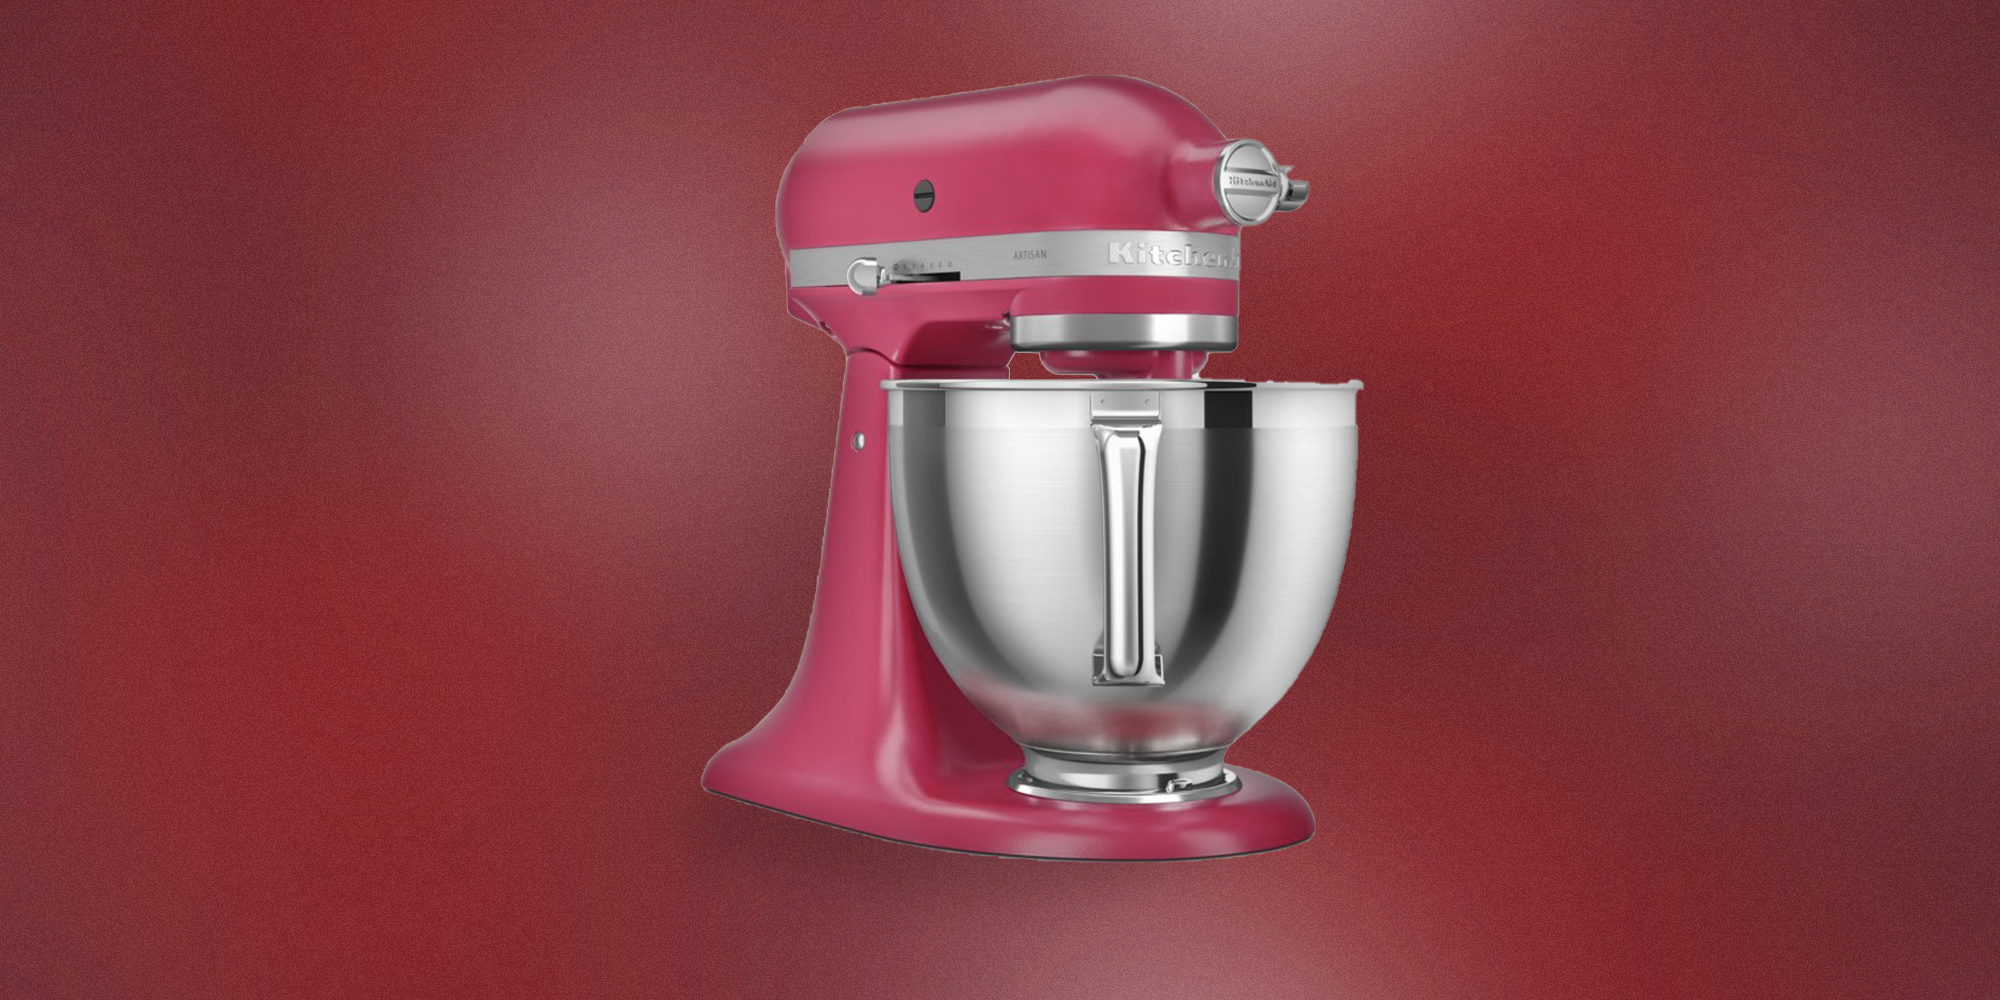 KitchenAid announces new products, 2020 color of the year - Reviewed